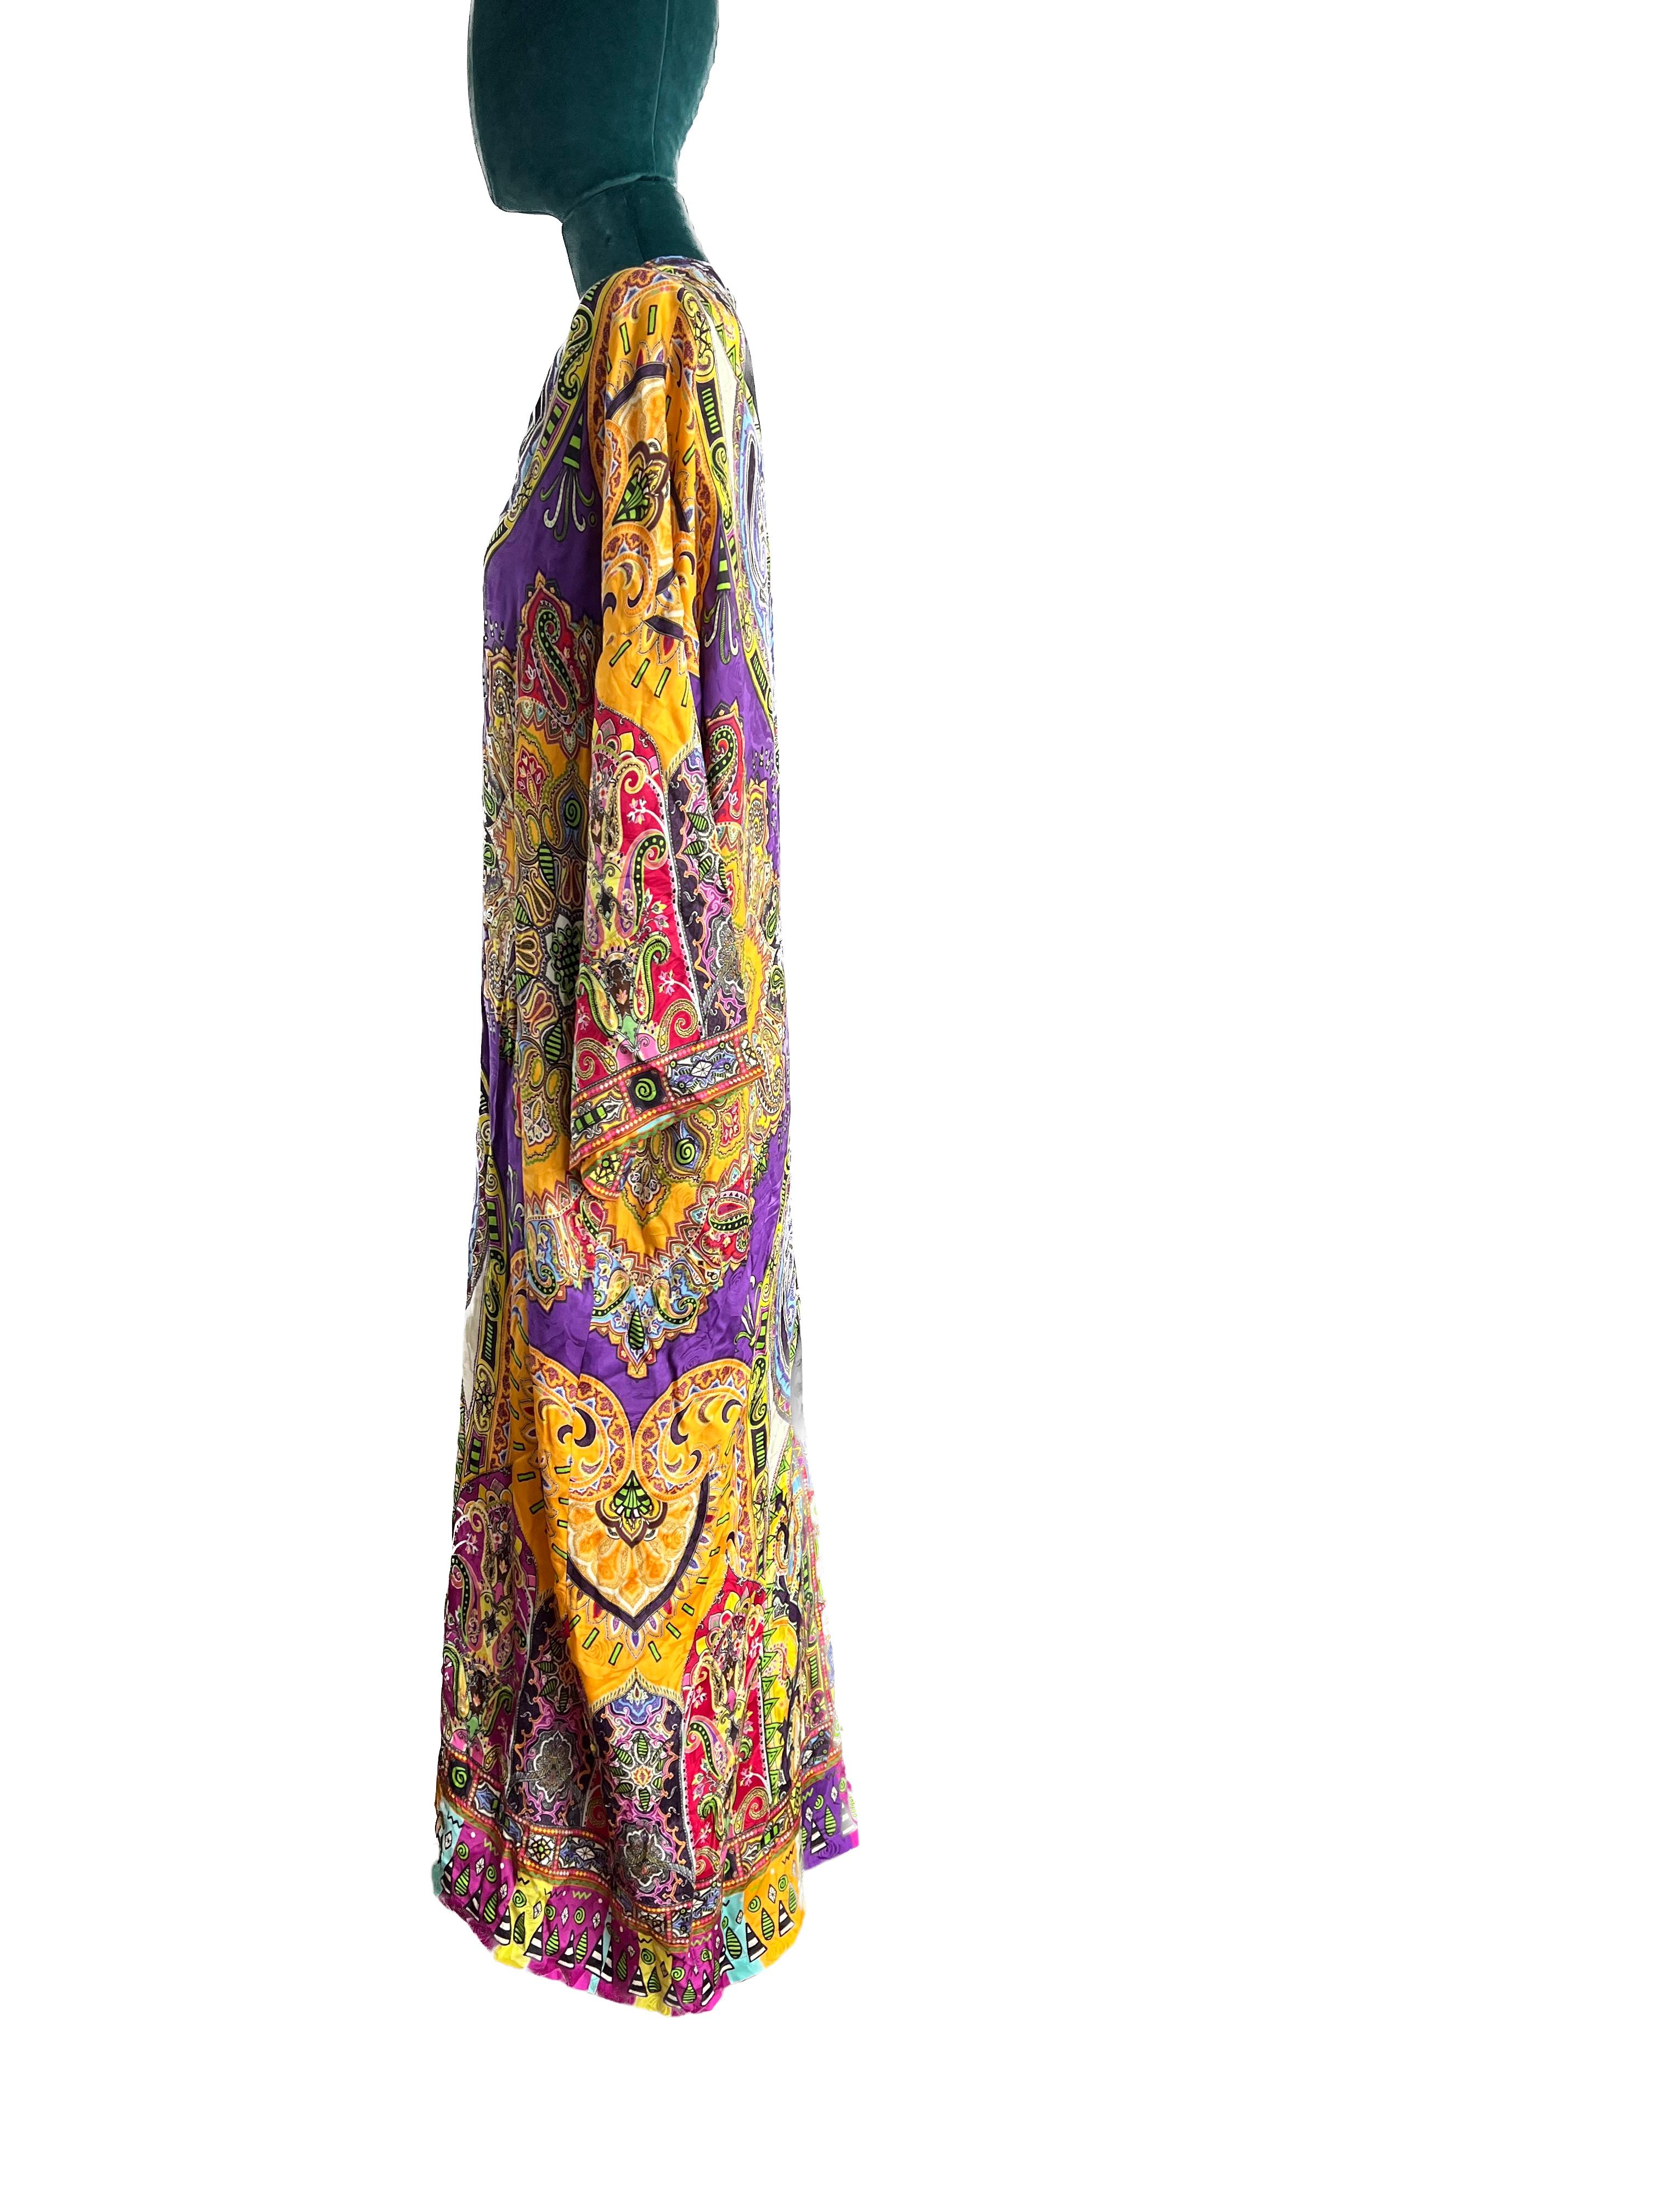 
Behold the captivating Etro kaftan, a wearable masterpiece that transports you to a world of vibrant ethnic elegance. The foundation of this kaftan is a regal purple base, setting the stage for a mesmerizing interplay of colors. Rich splashes of